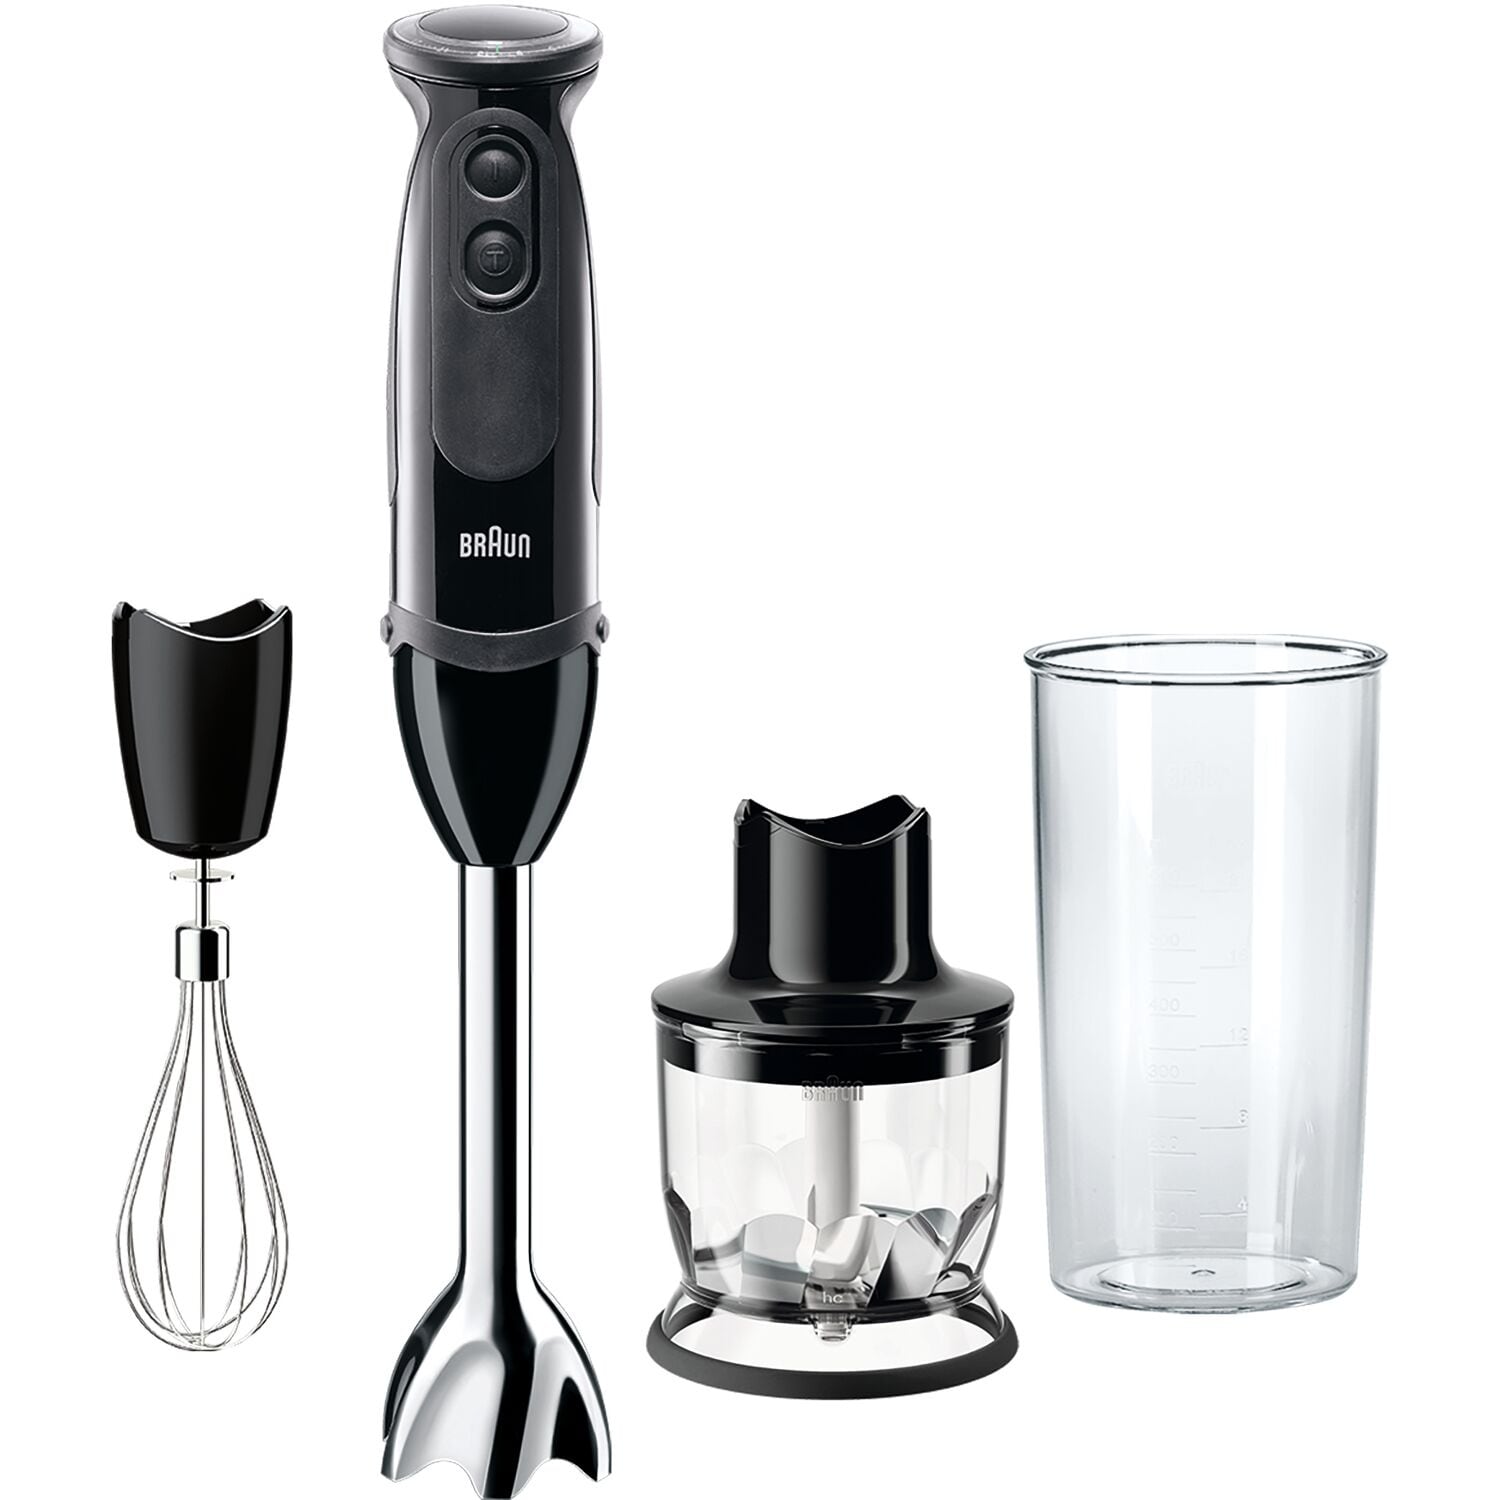 https://ak1.ostkcdn.com/images/products/is/images/direct/bbe34778ec08a4b4a760b2a8c465556226d9c8e9/Braun-MultiQuick-5-Vario-Hand-Blender-with-21-Speeds%2C-Whisk%2C-and-1.5-Cup-Chopper.jpg